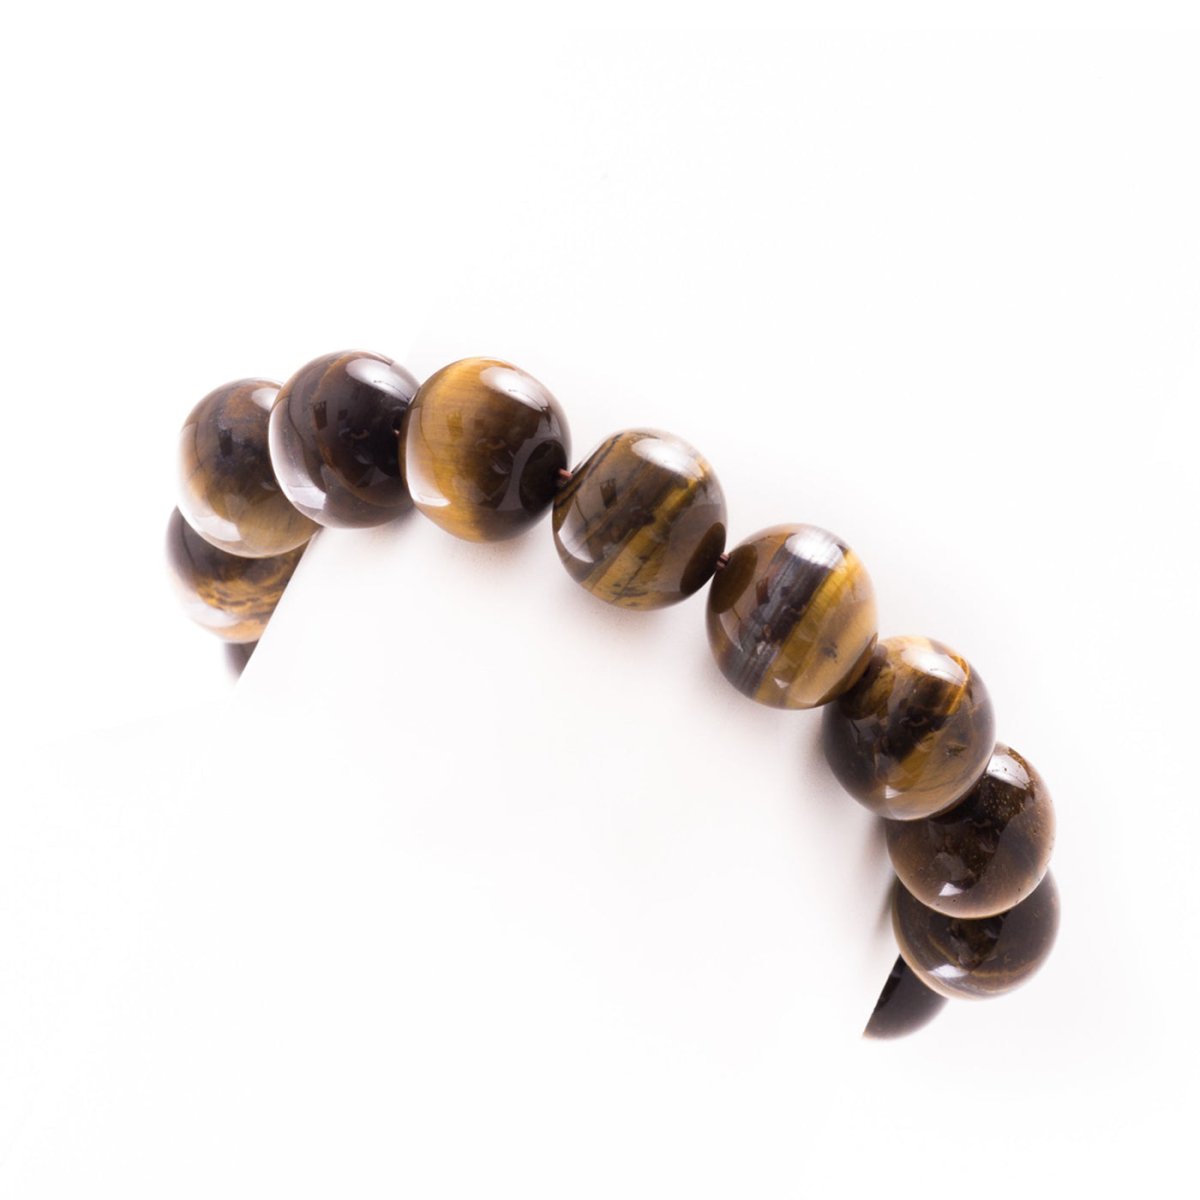 A Yellow Tiger Eye Gemstone Bracelet For Good Luck for Men and Women.